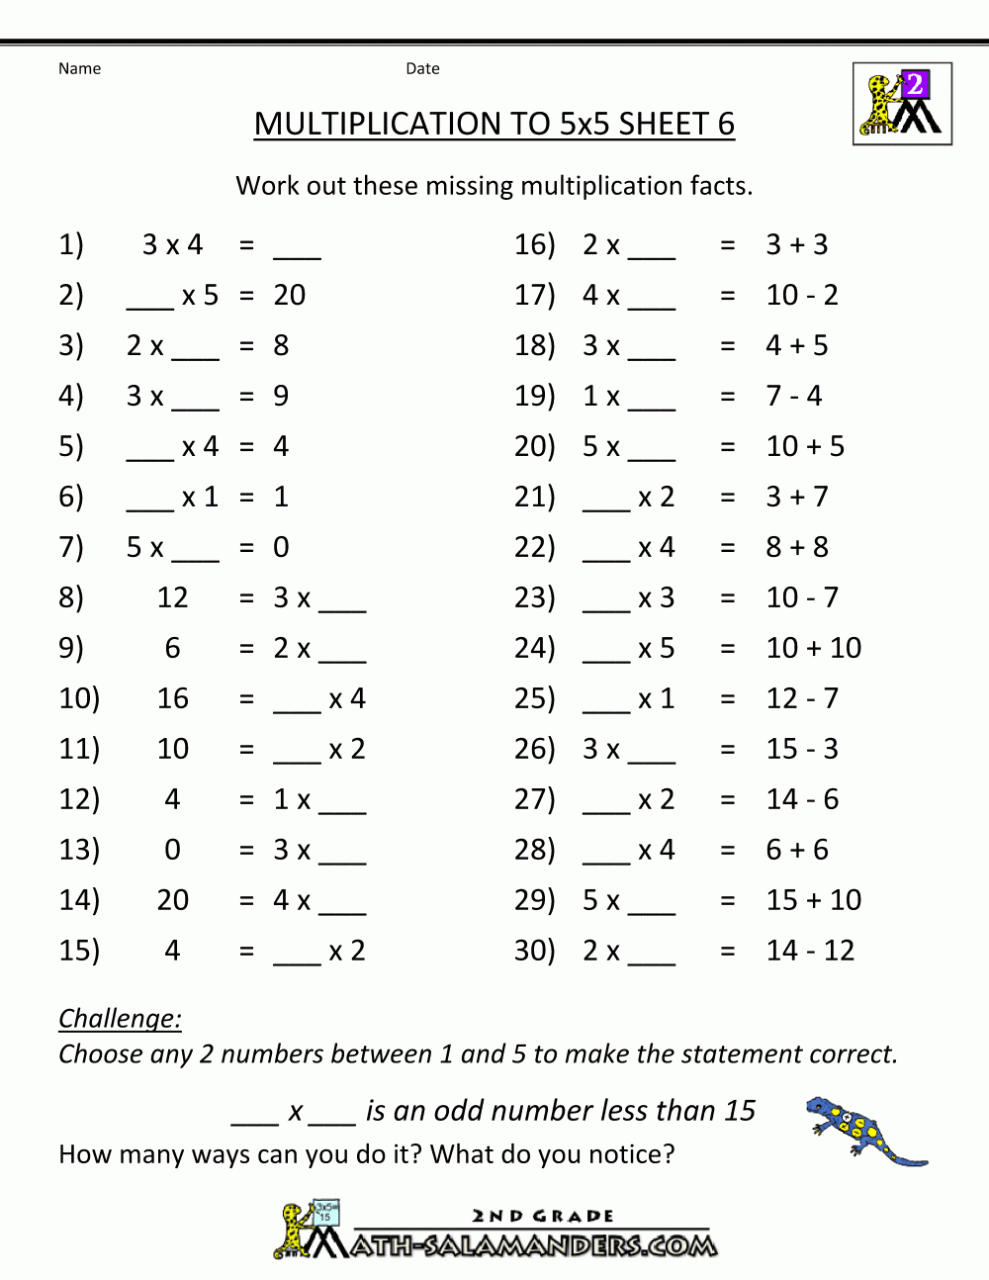 6th Grade Ratio And Proportion Class 6 Worksheet Pdf